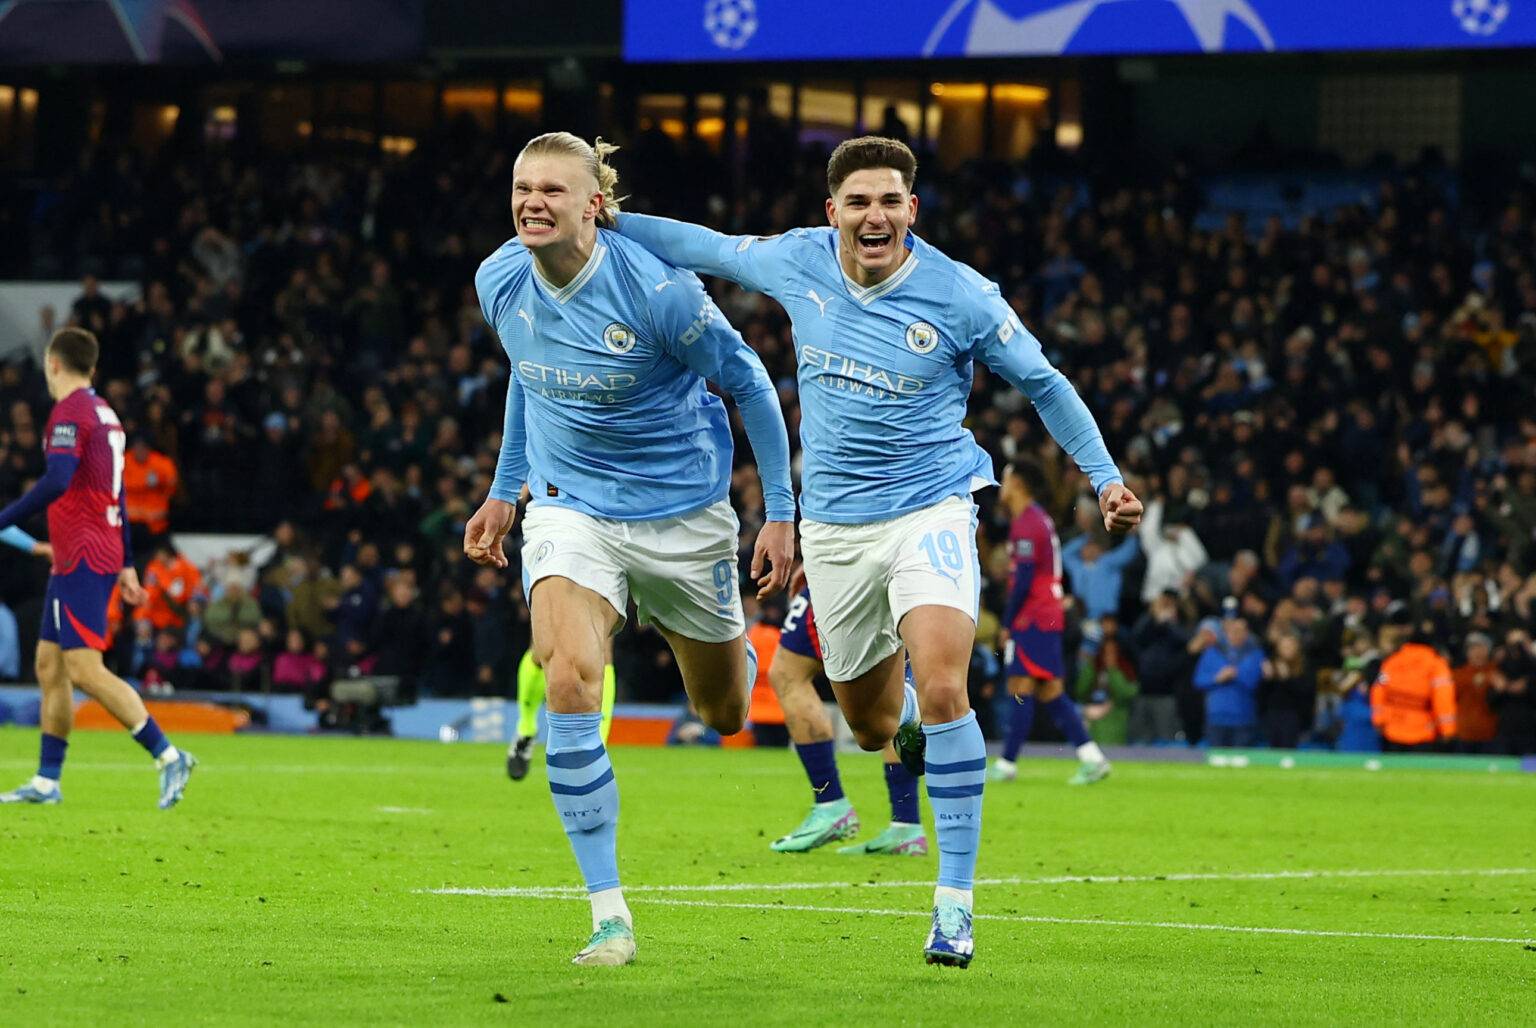 Champions League fixtures – 06/03 – Man City & Real Madrid in action tonight 